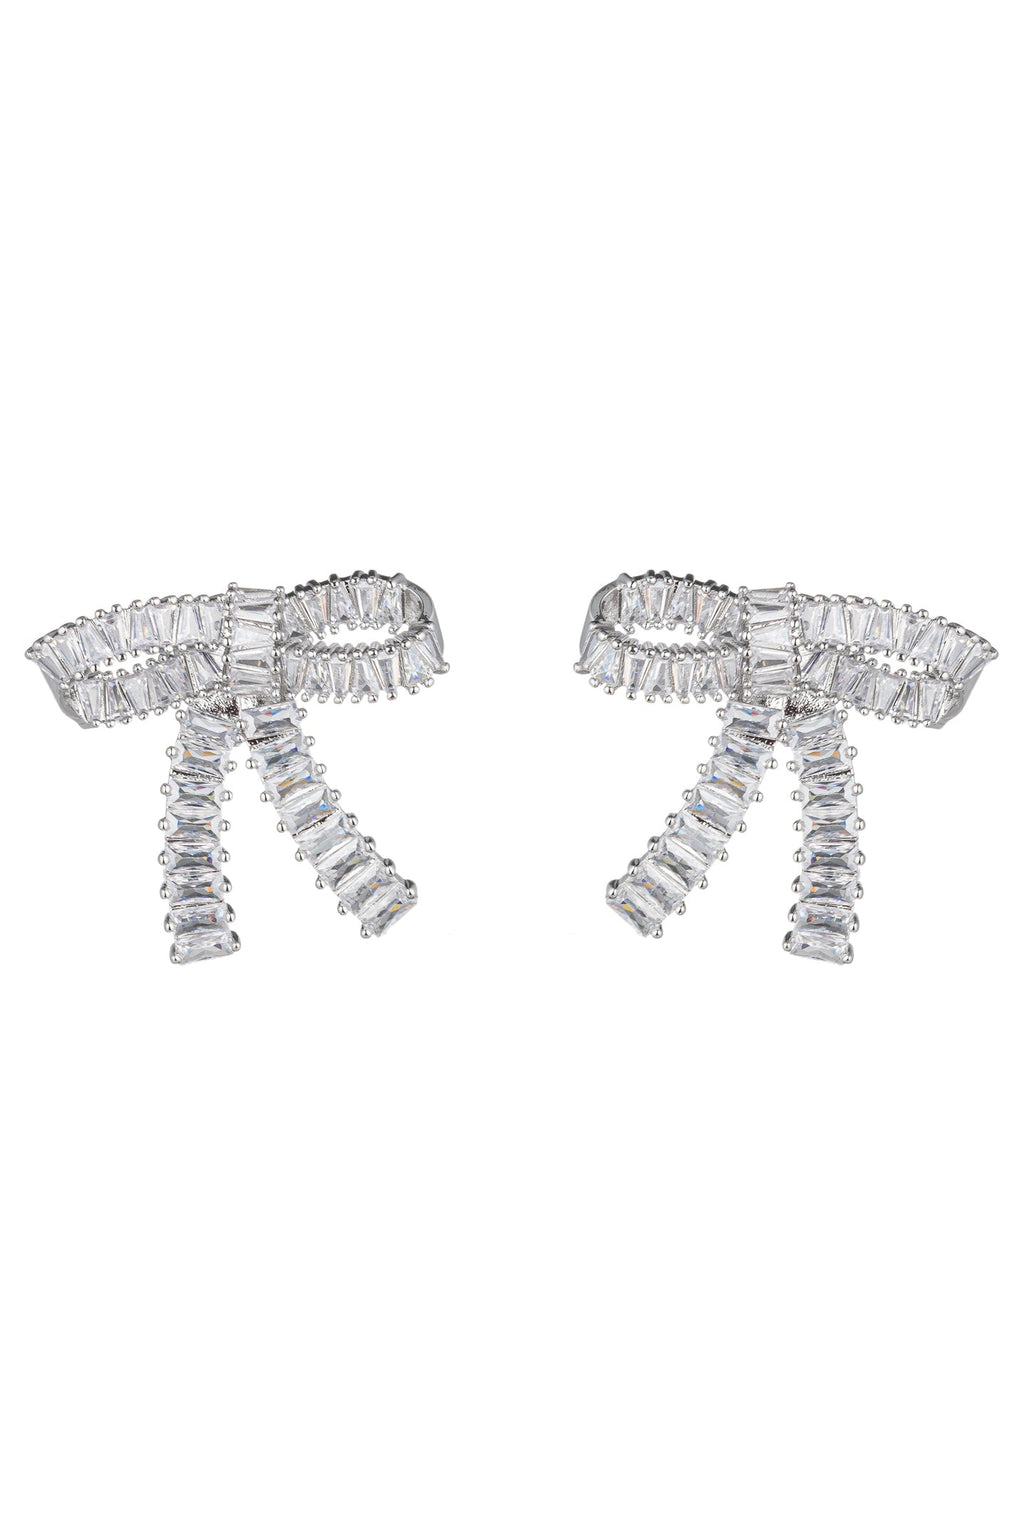 Le Bow Cubic Zirconia Stud Earrings: A Touch of Elegance for Every Occasion.